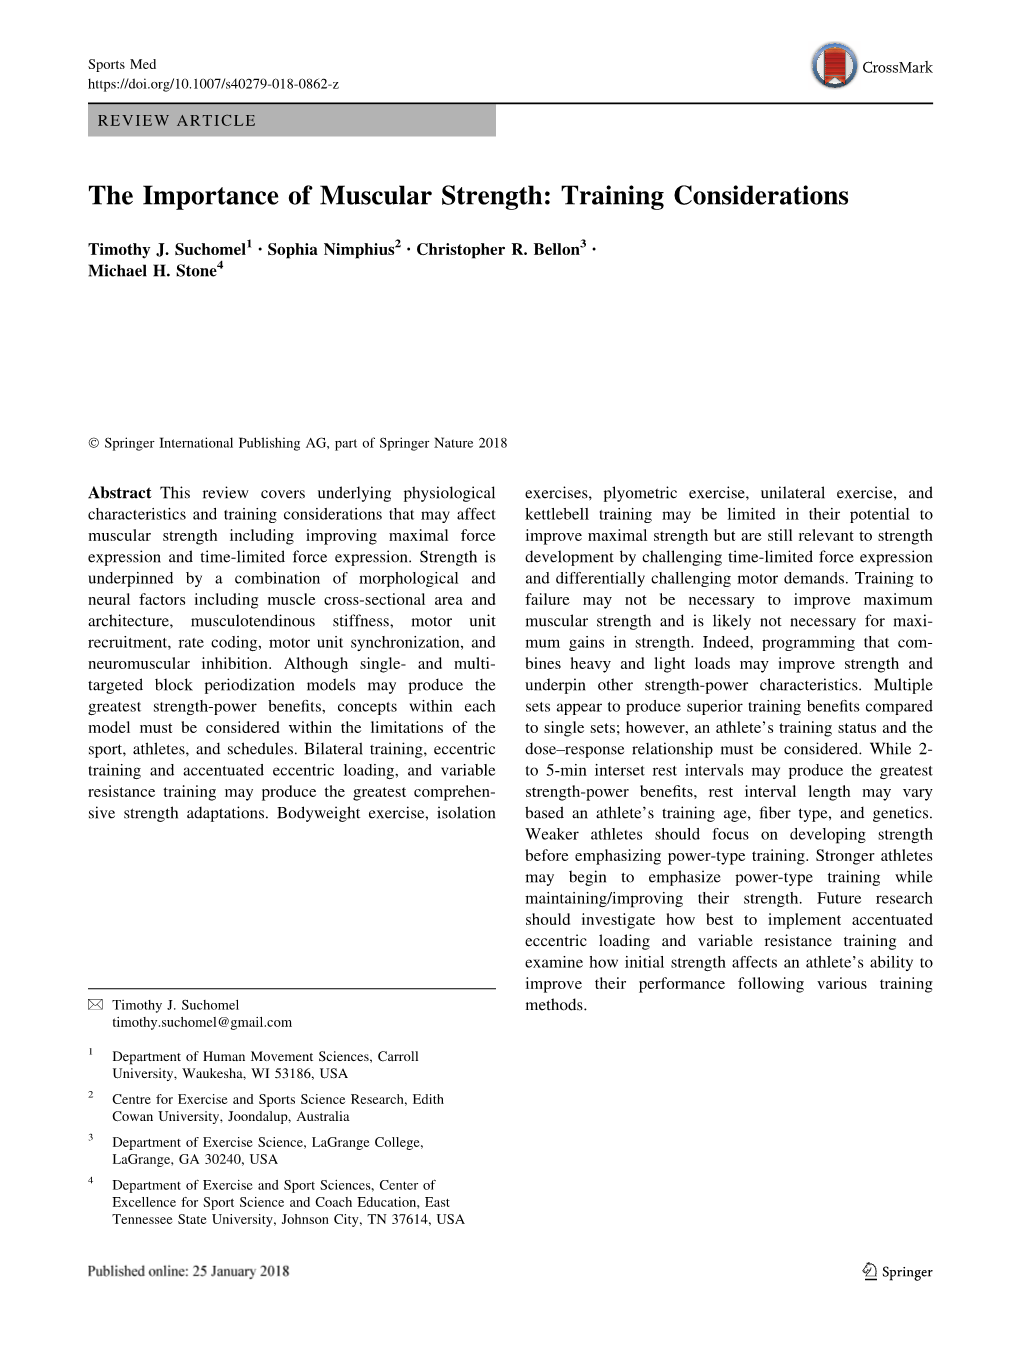 The Importance of Muscular Strength: Training Considerations